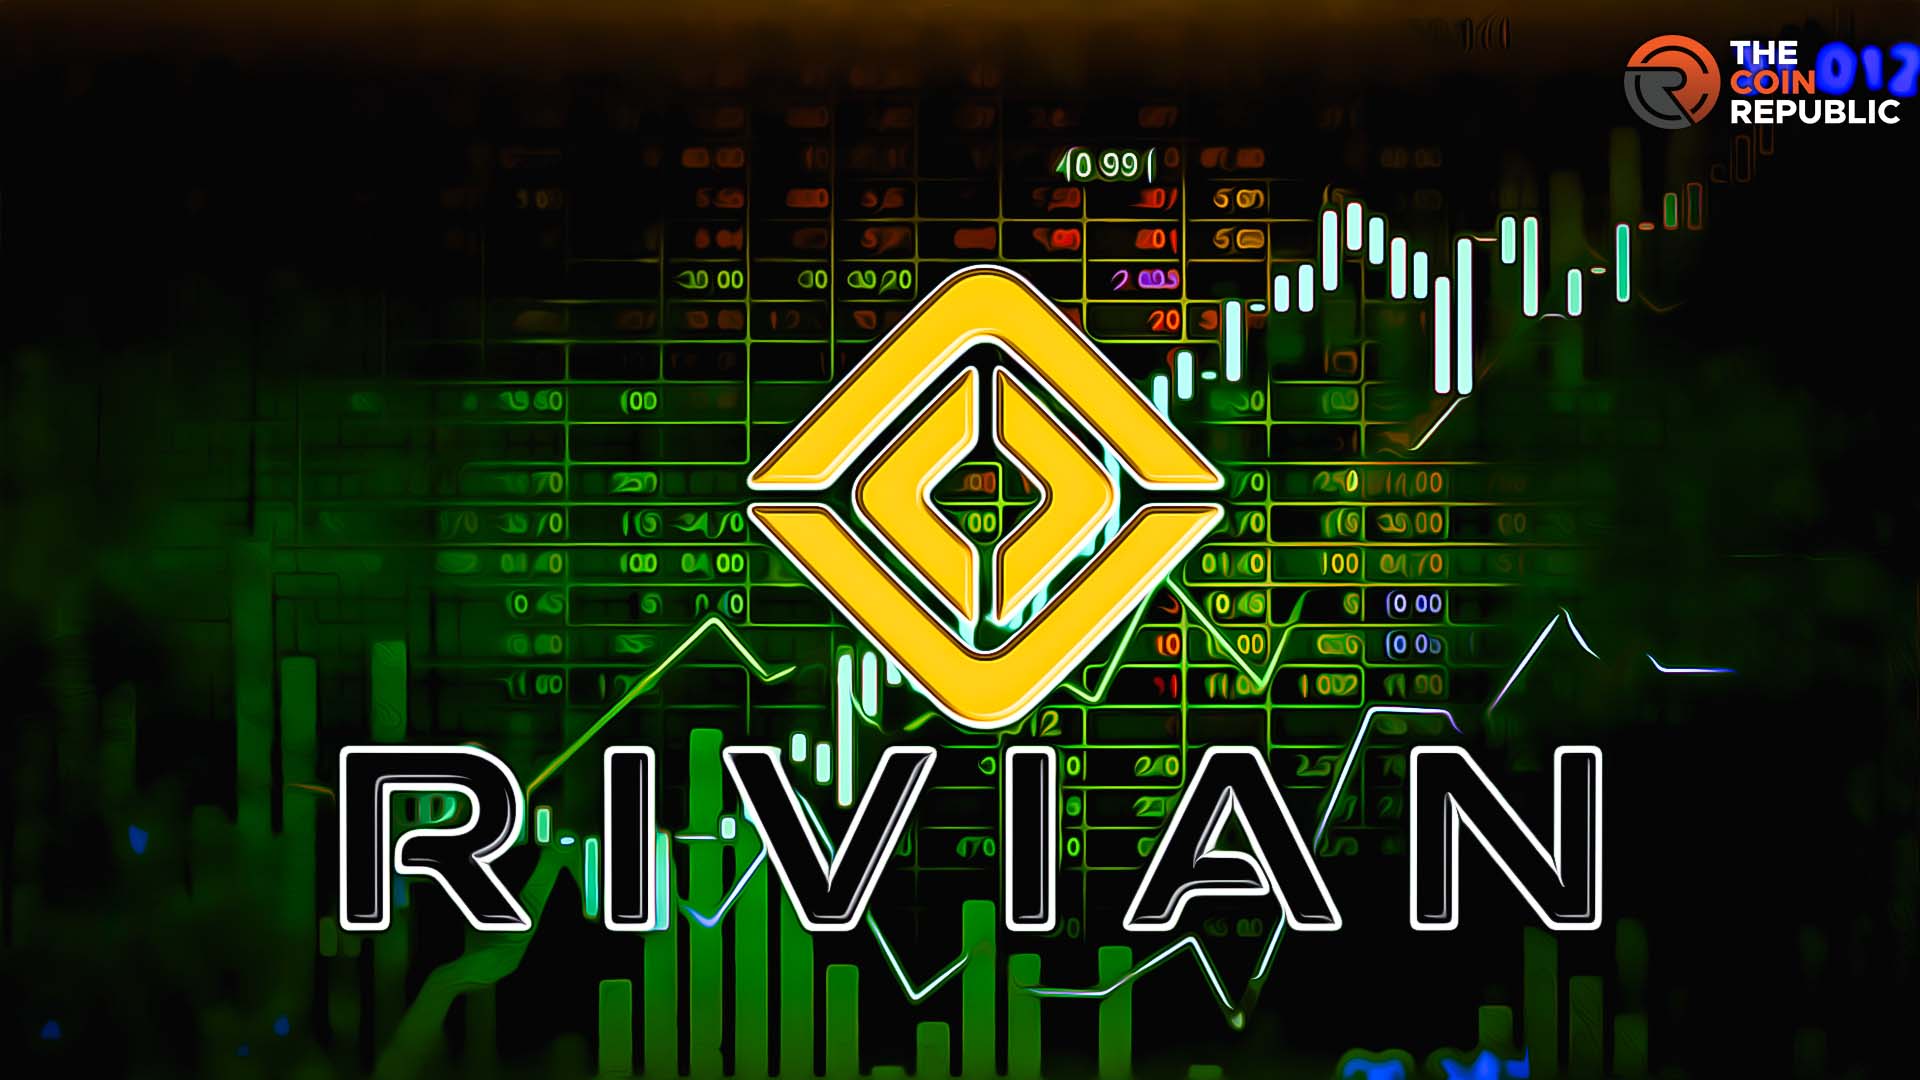 Rivian Stock Price Prediction: Is RIVN Stock Ready For $20?